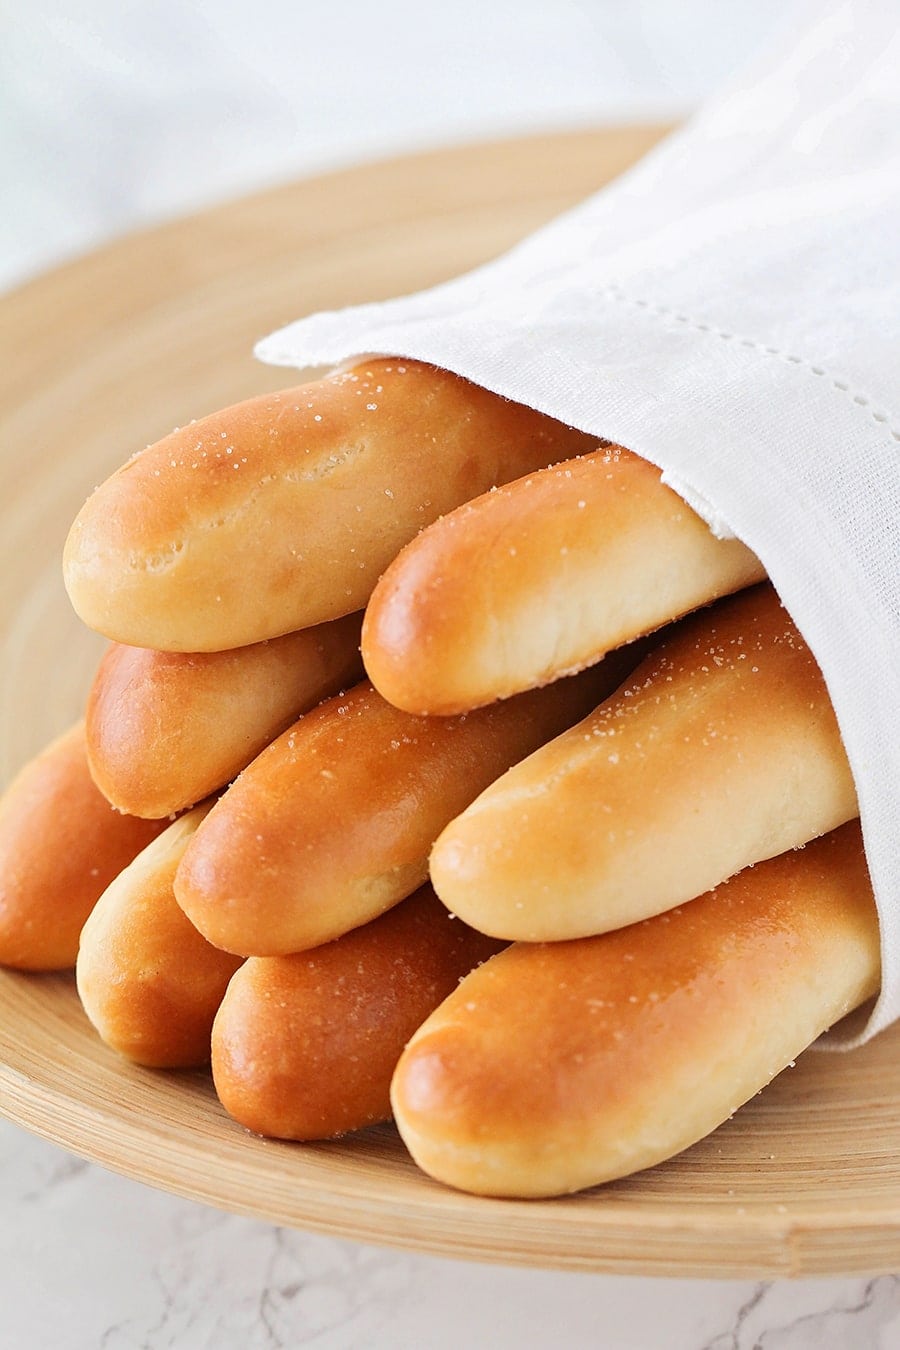 Dinner Rolls and Biscuits - Pile of olive garden breadsticks in a cloth.